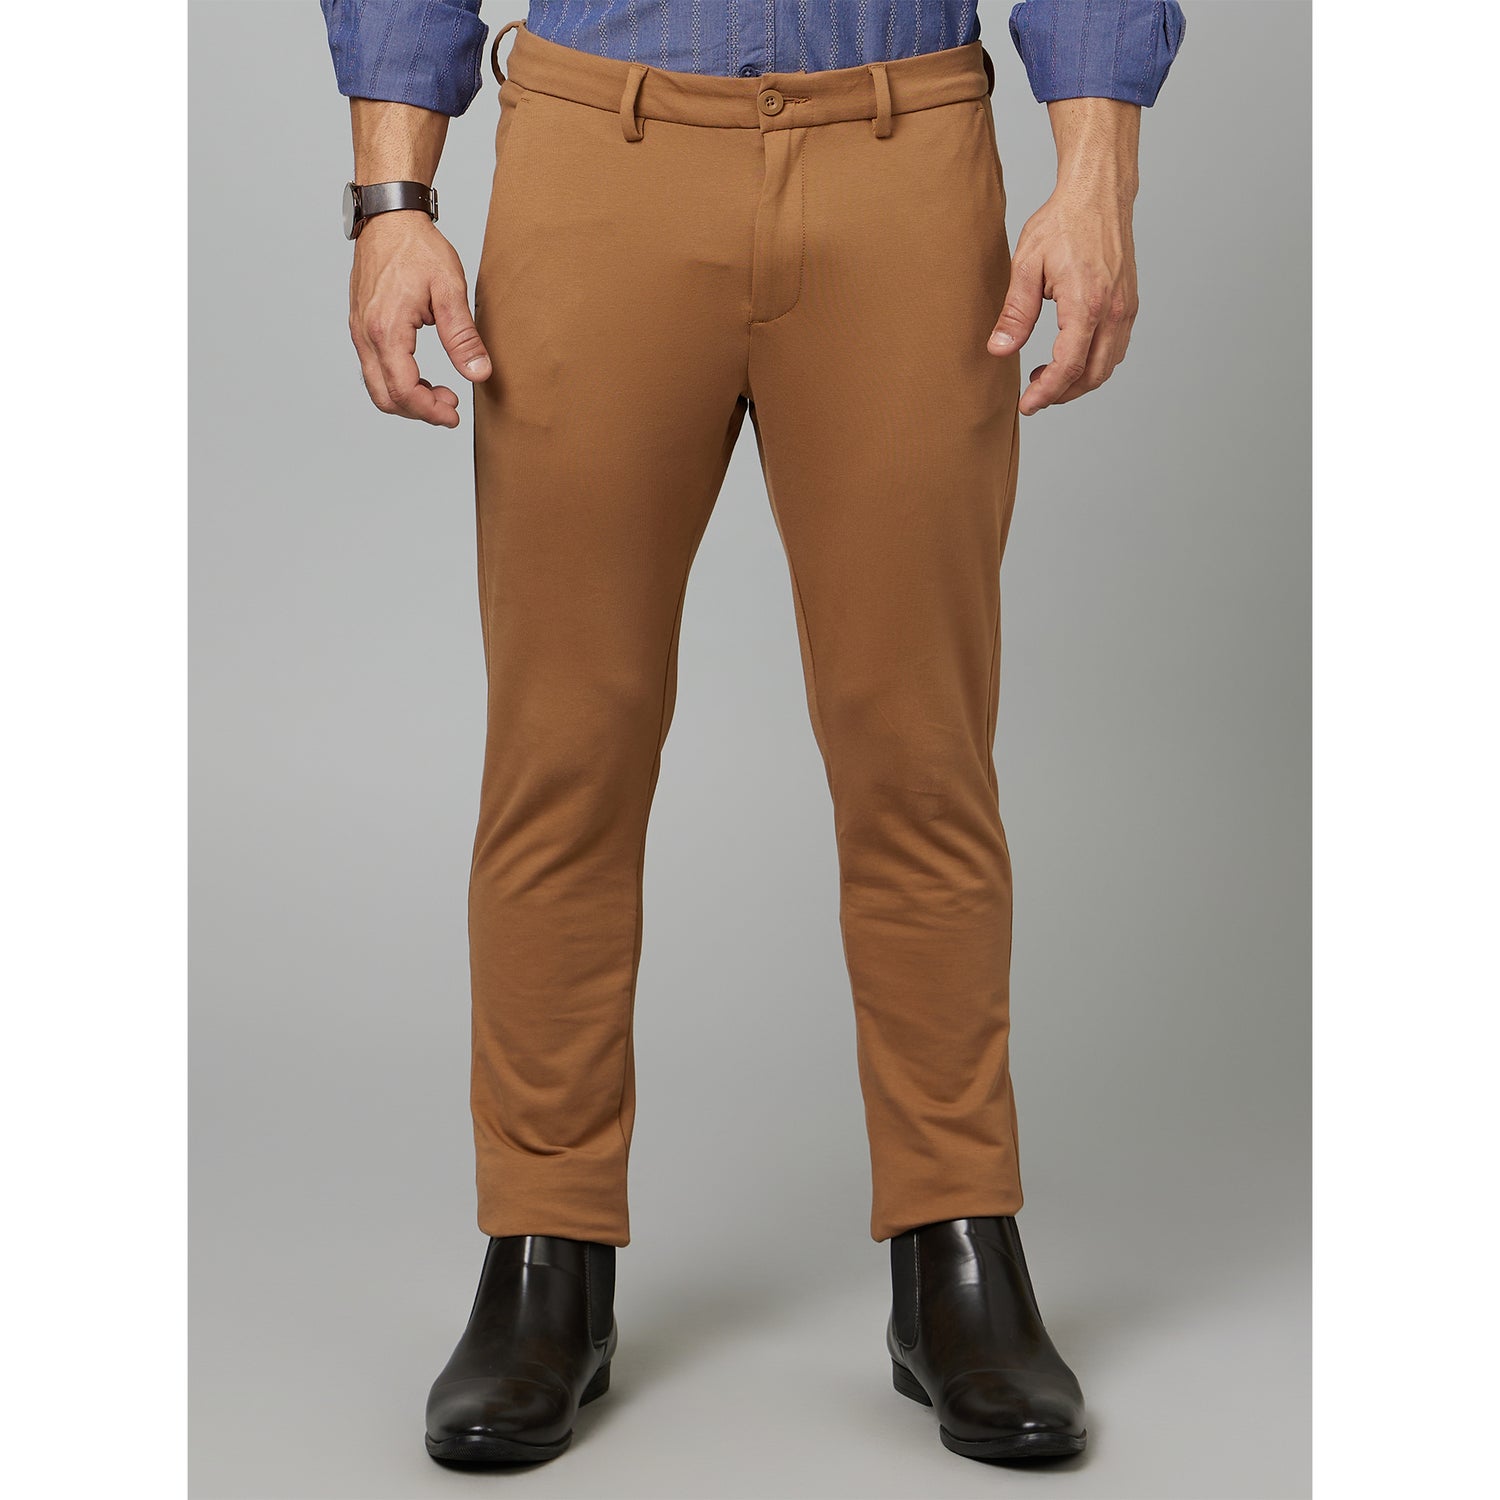 Beige Mid Rise Plain Cotton Slim Fit Chinos Trousers (COKNITNEW)